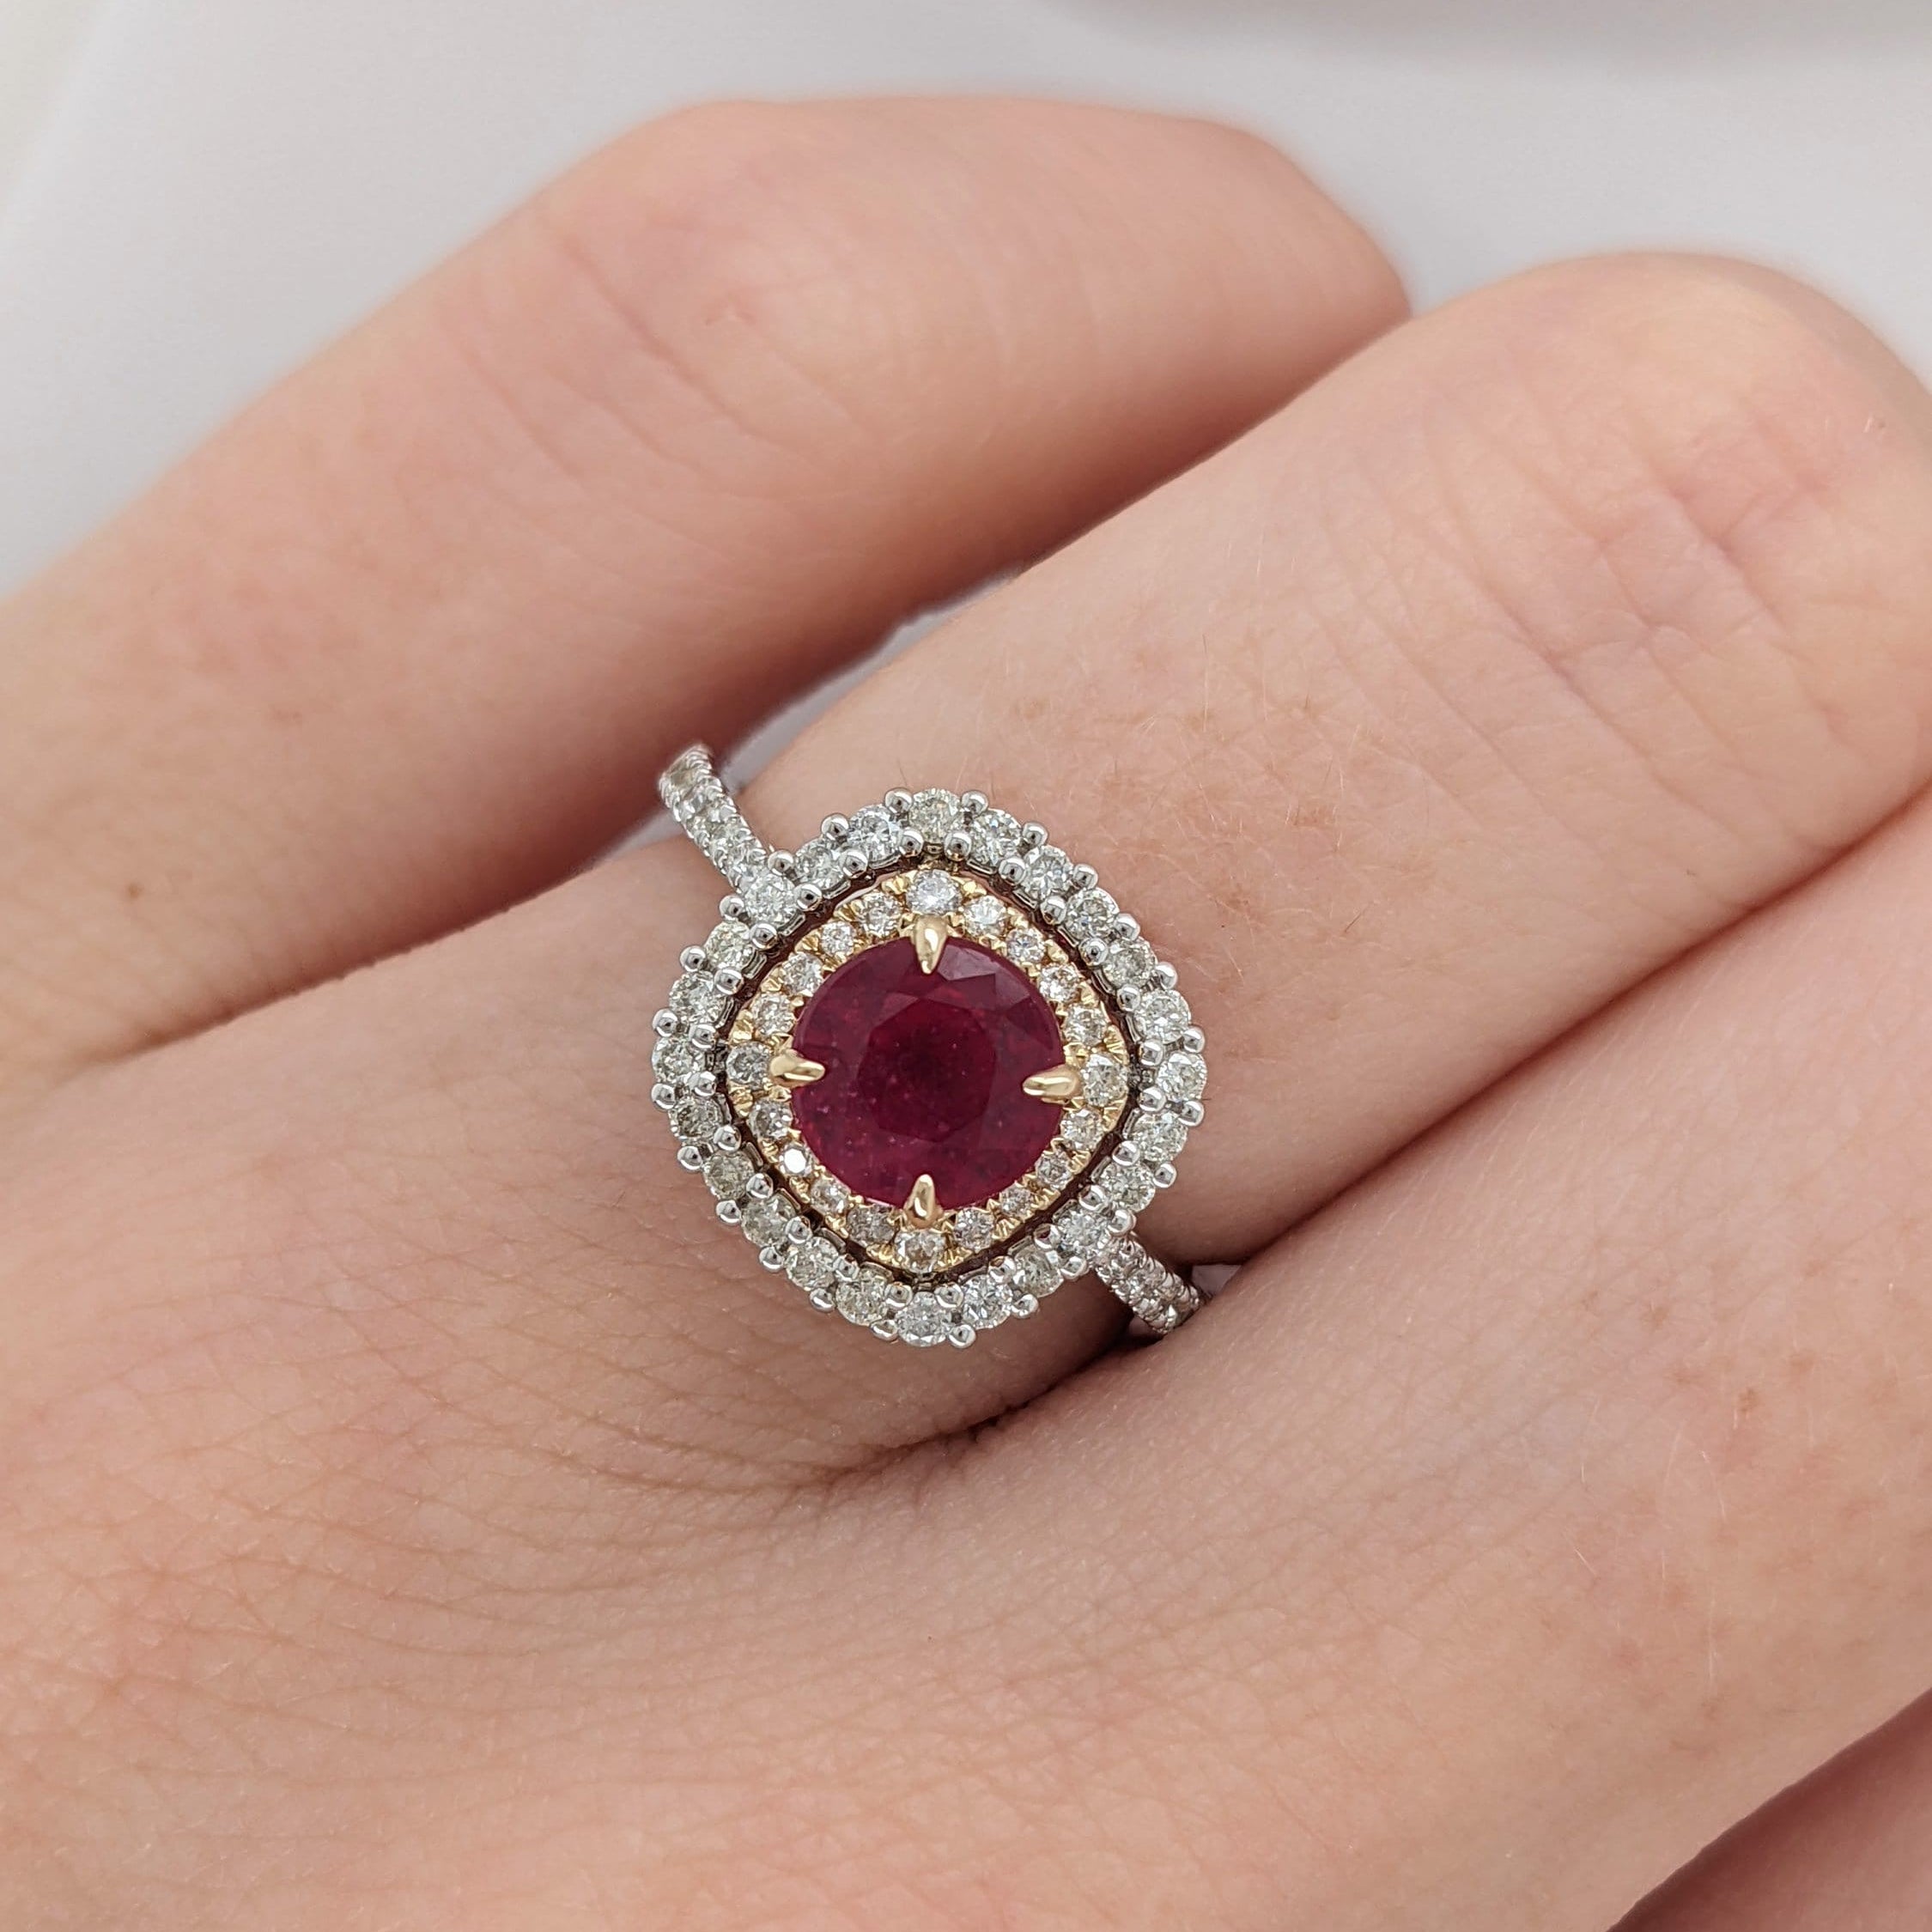 Statement Rings-Beautiful Ruby Set in a Double Halo of Diamonds in 14K Solid Gold Ring | Round 6mm | Pave Band | Birthstone Ring | Anniversary | Engagement - NNJGemstones